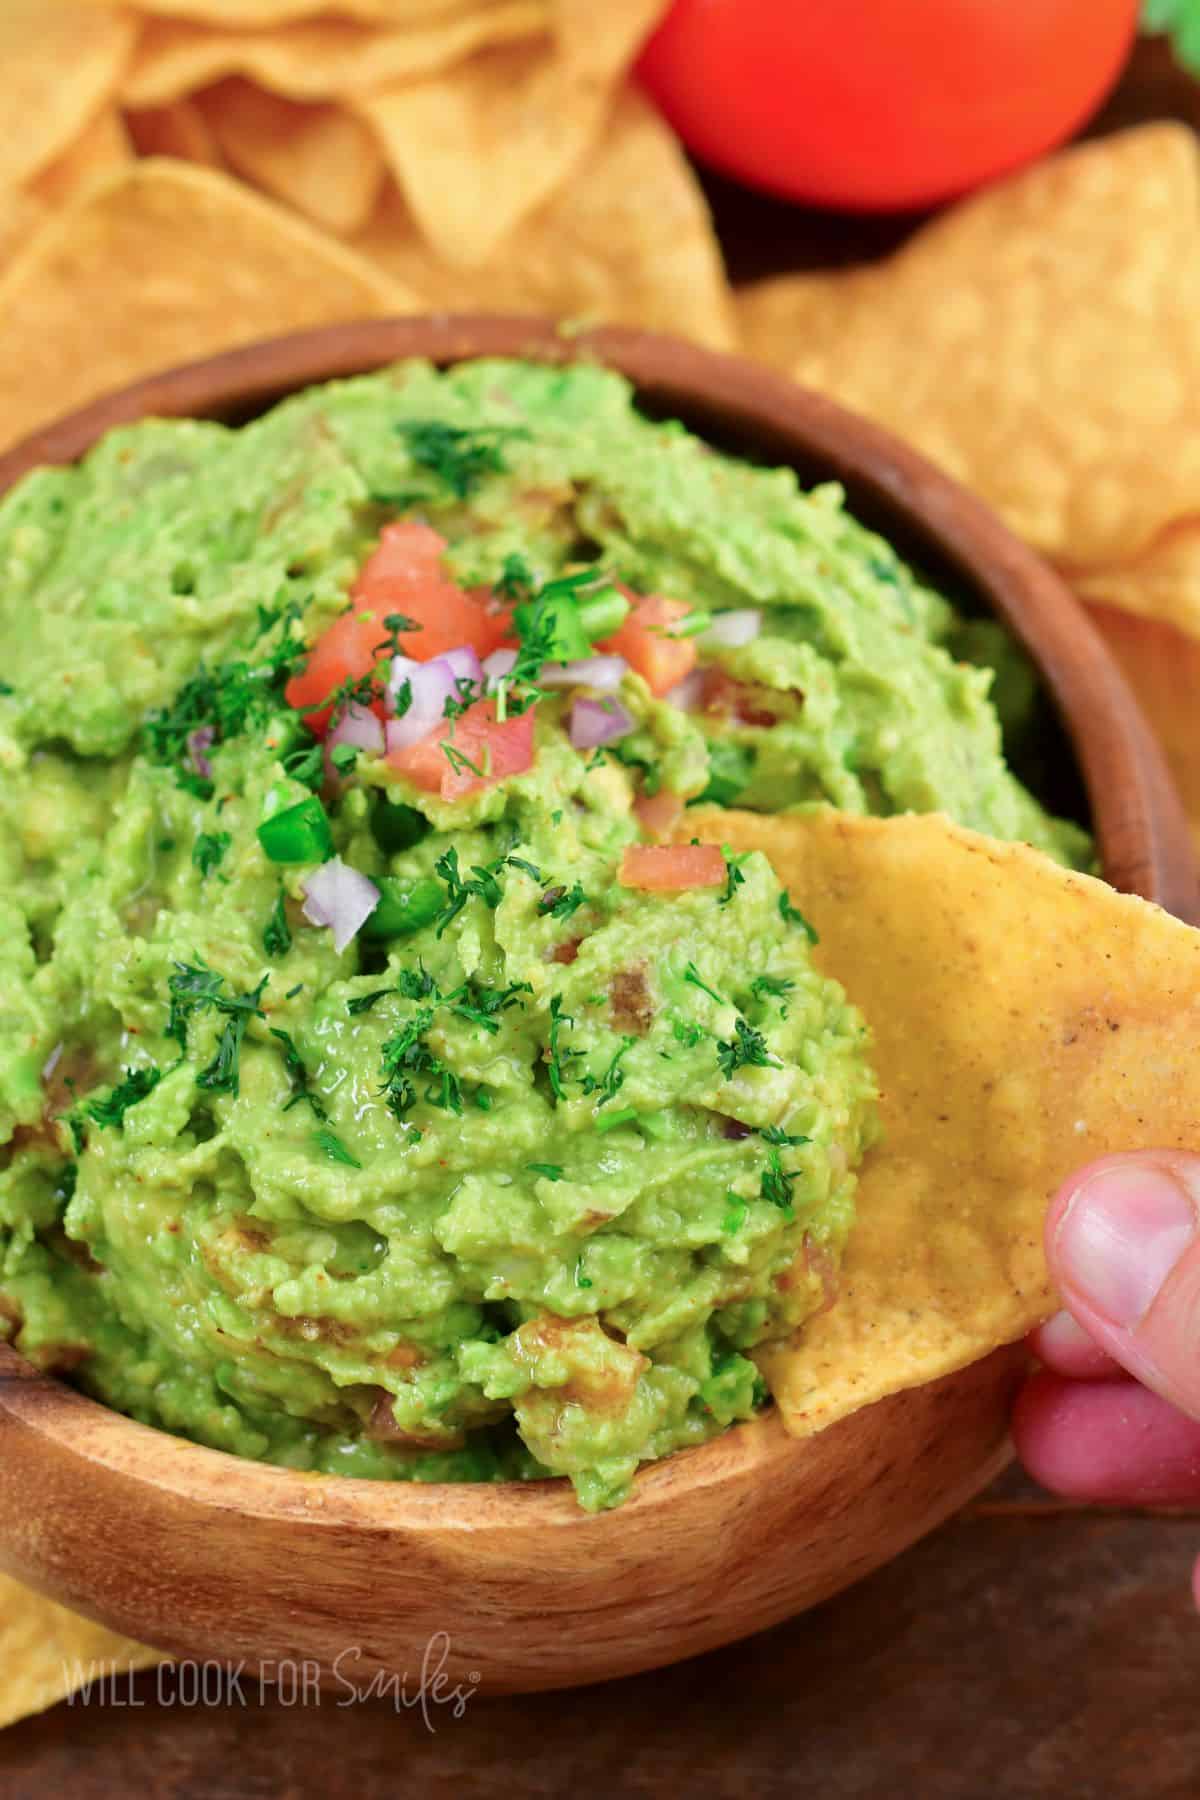 scooping out some guacamole with a tortilla chip.